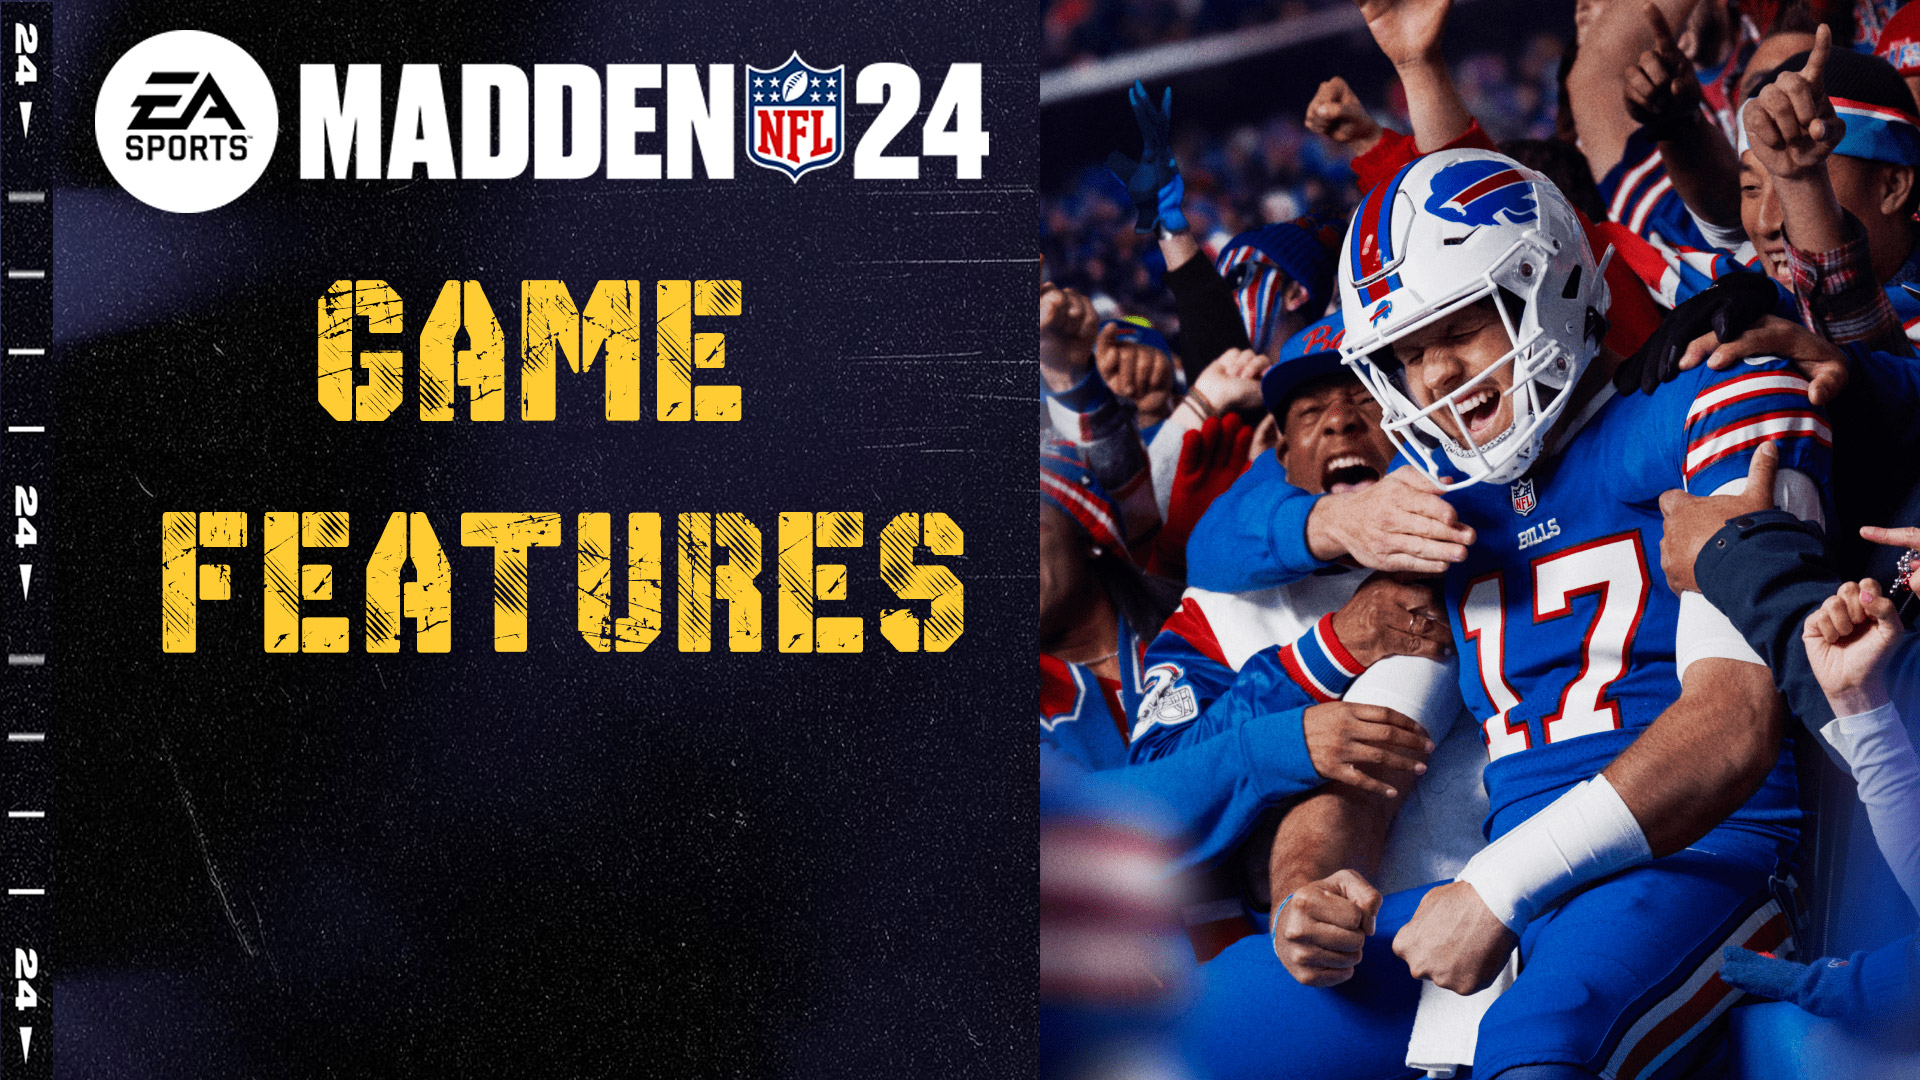 EA Sports 'Madden NFL 24' delivers realism and control on every play  through FieldSENSE and debut of SAPIEN Technology